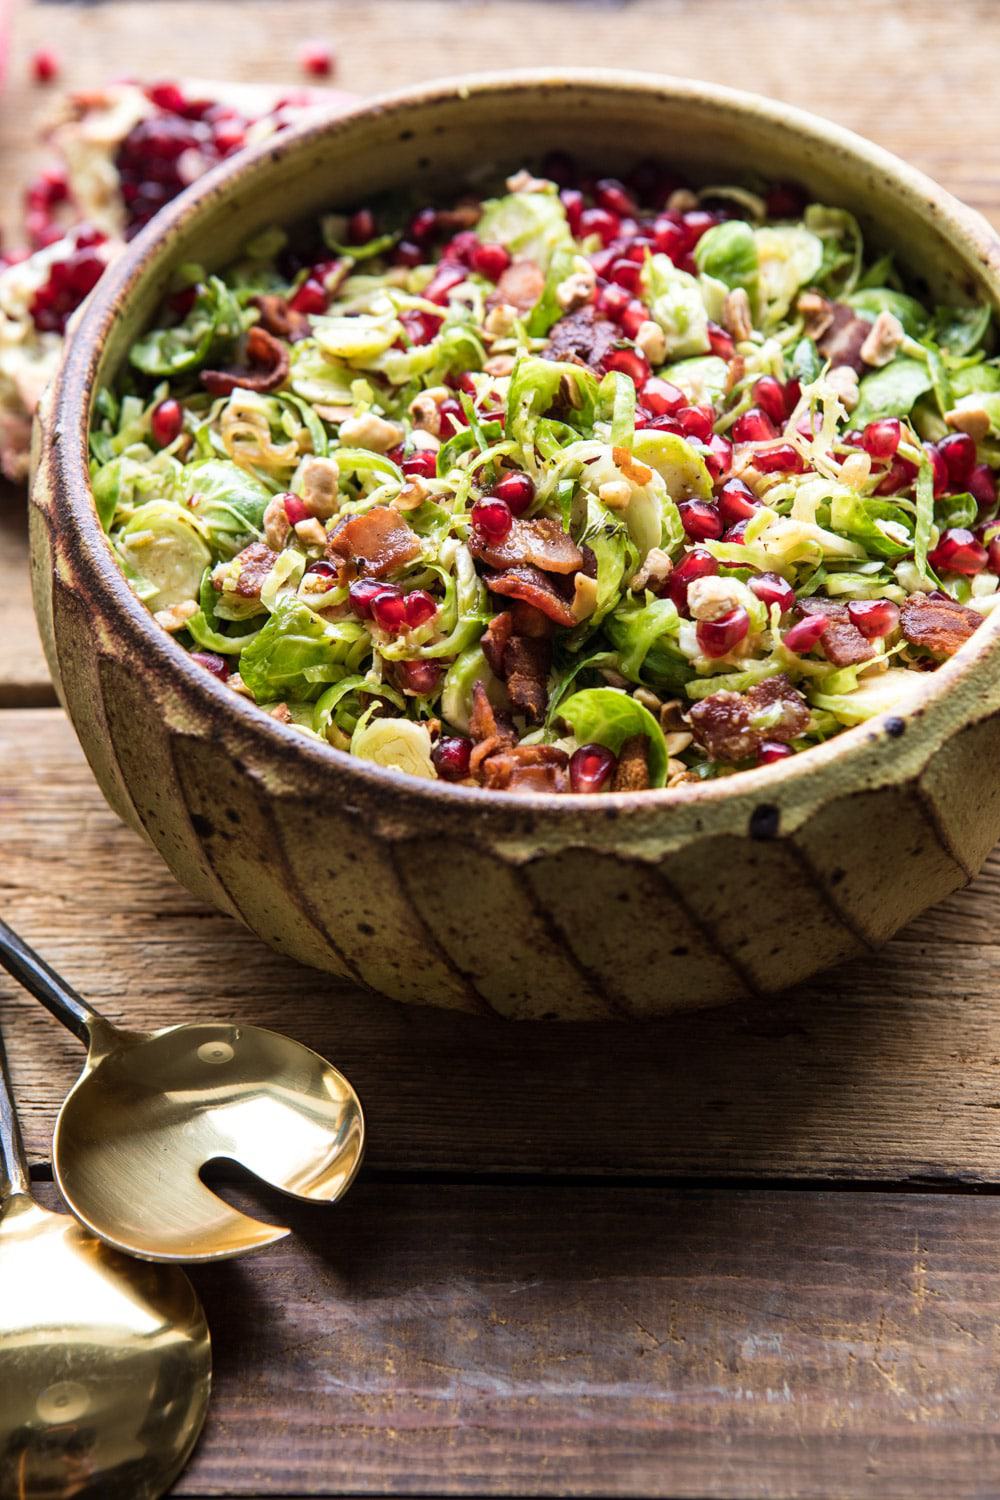 Shredded Brussels Sprout Bacon Salad with Warm Cider Vinaigrette. [Video]